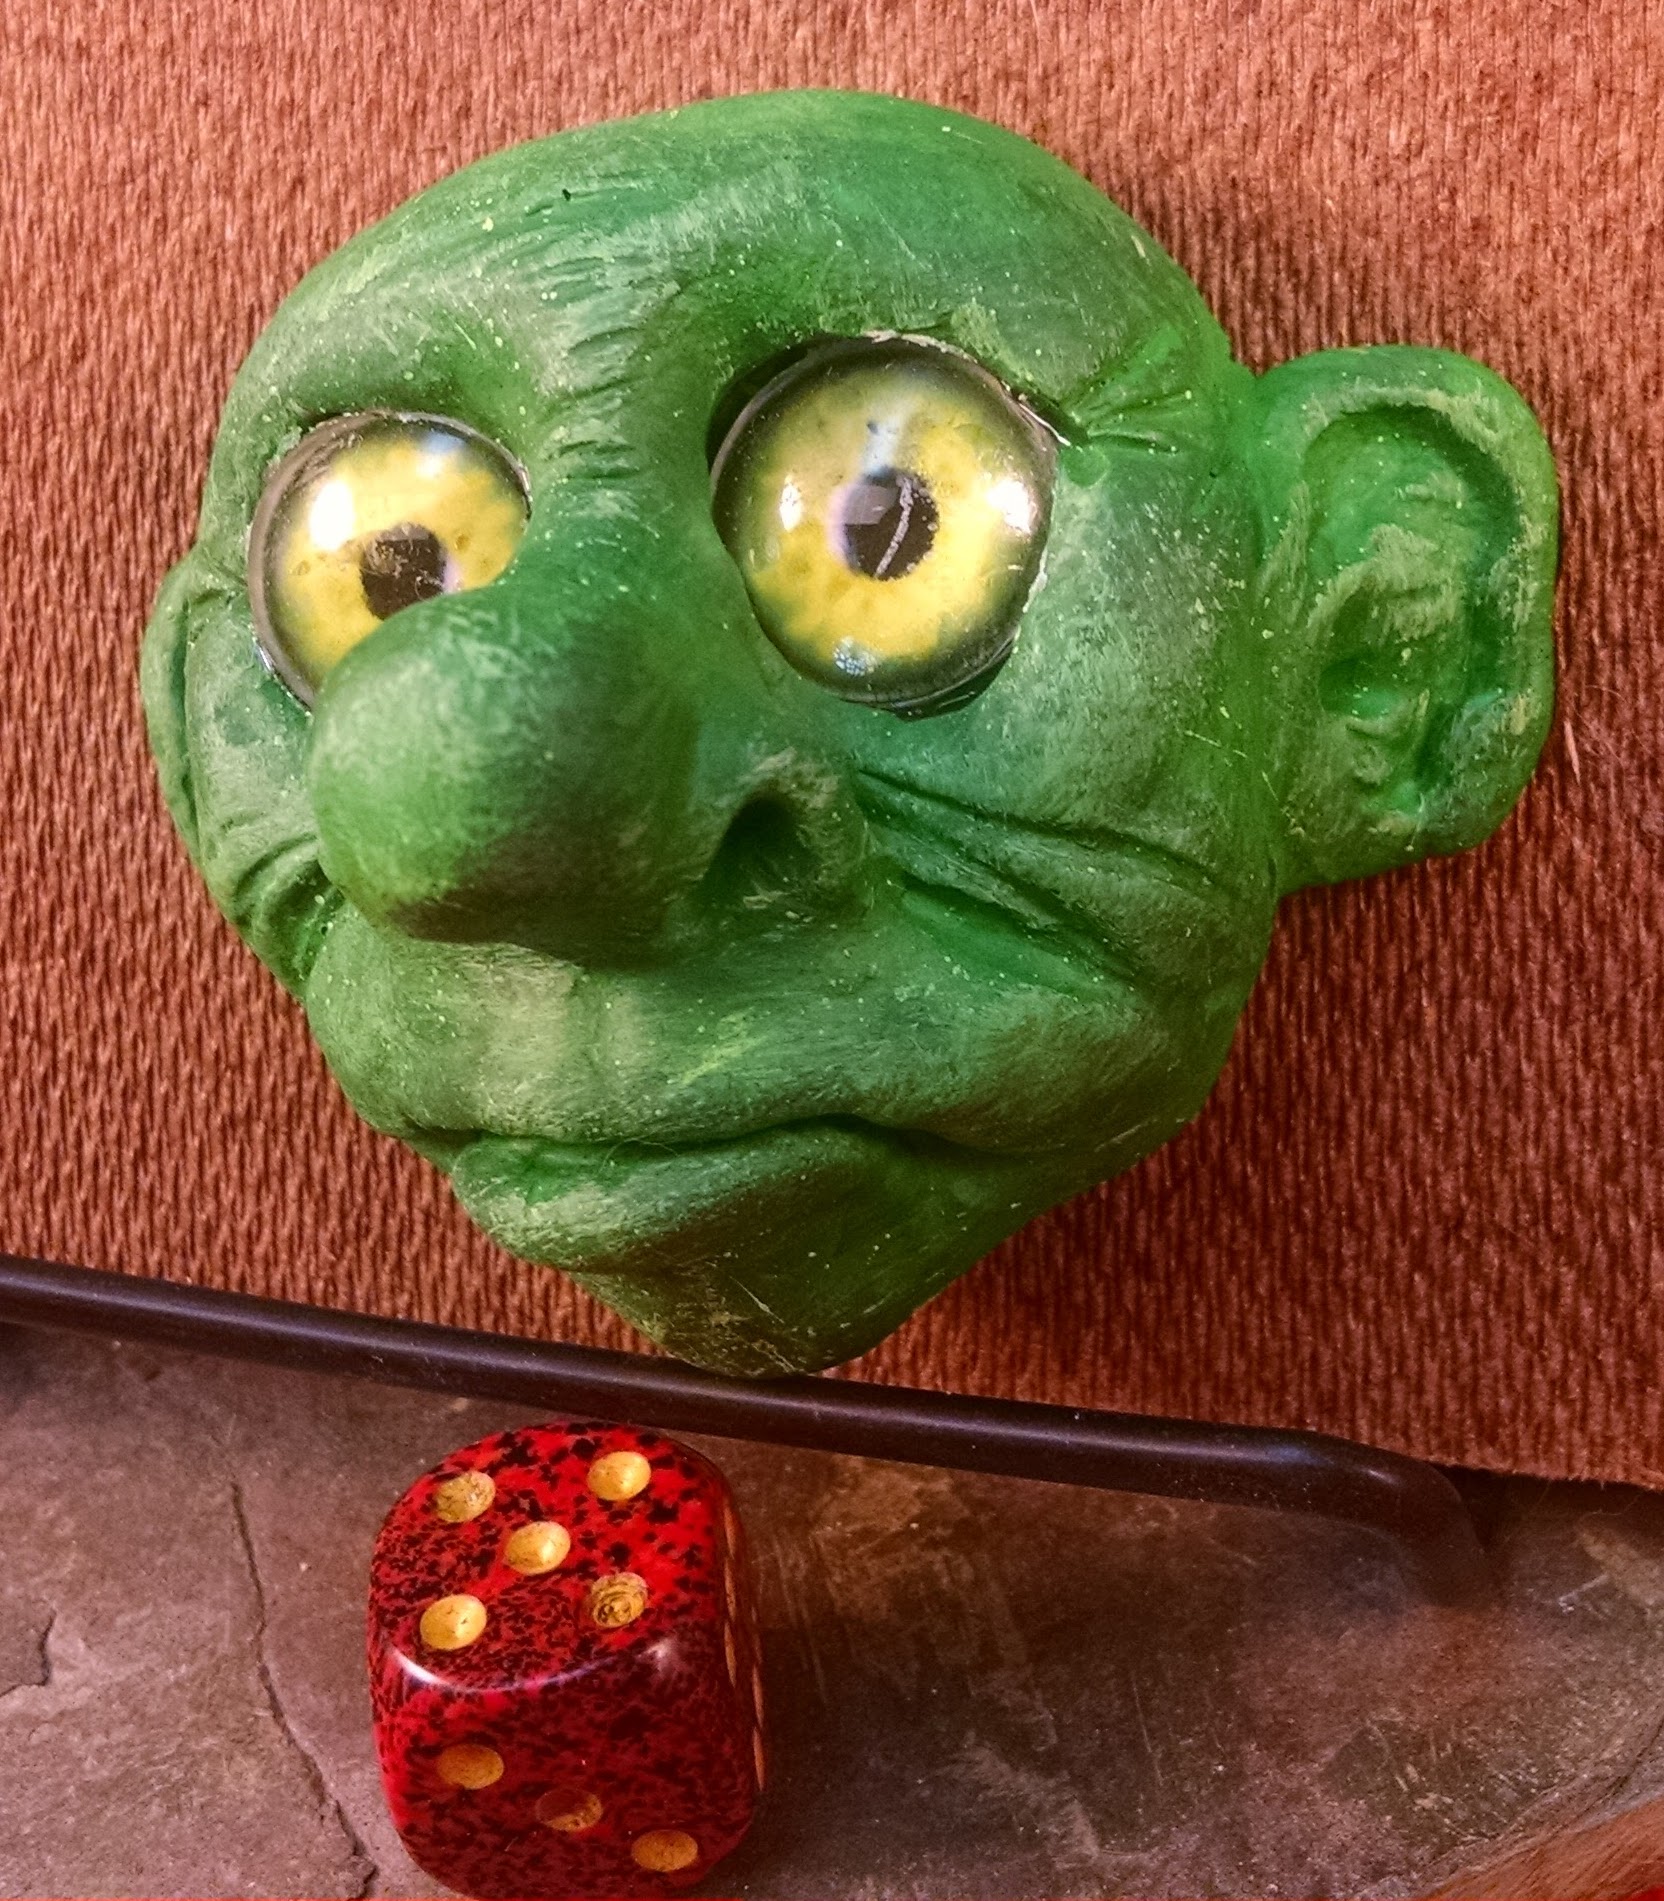 Goblins are Real - Designed by Todd Purse - Goblins - Magnet